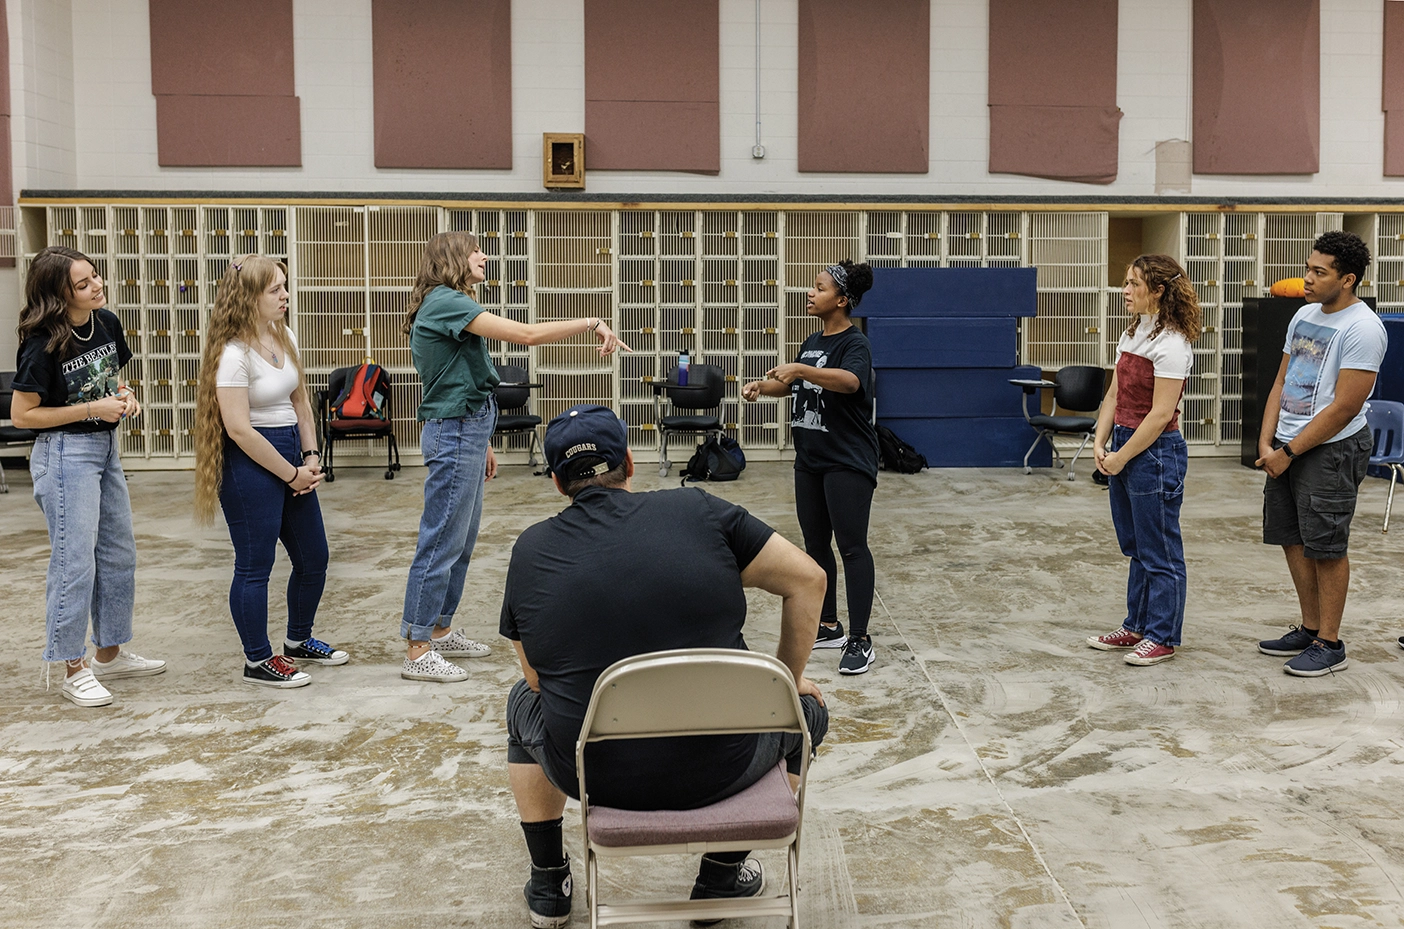 A theatre class does improv exercises in an old band classroom.